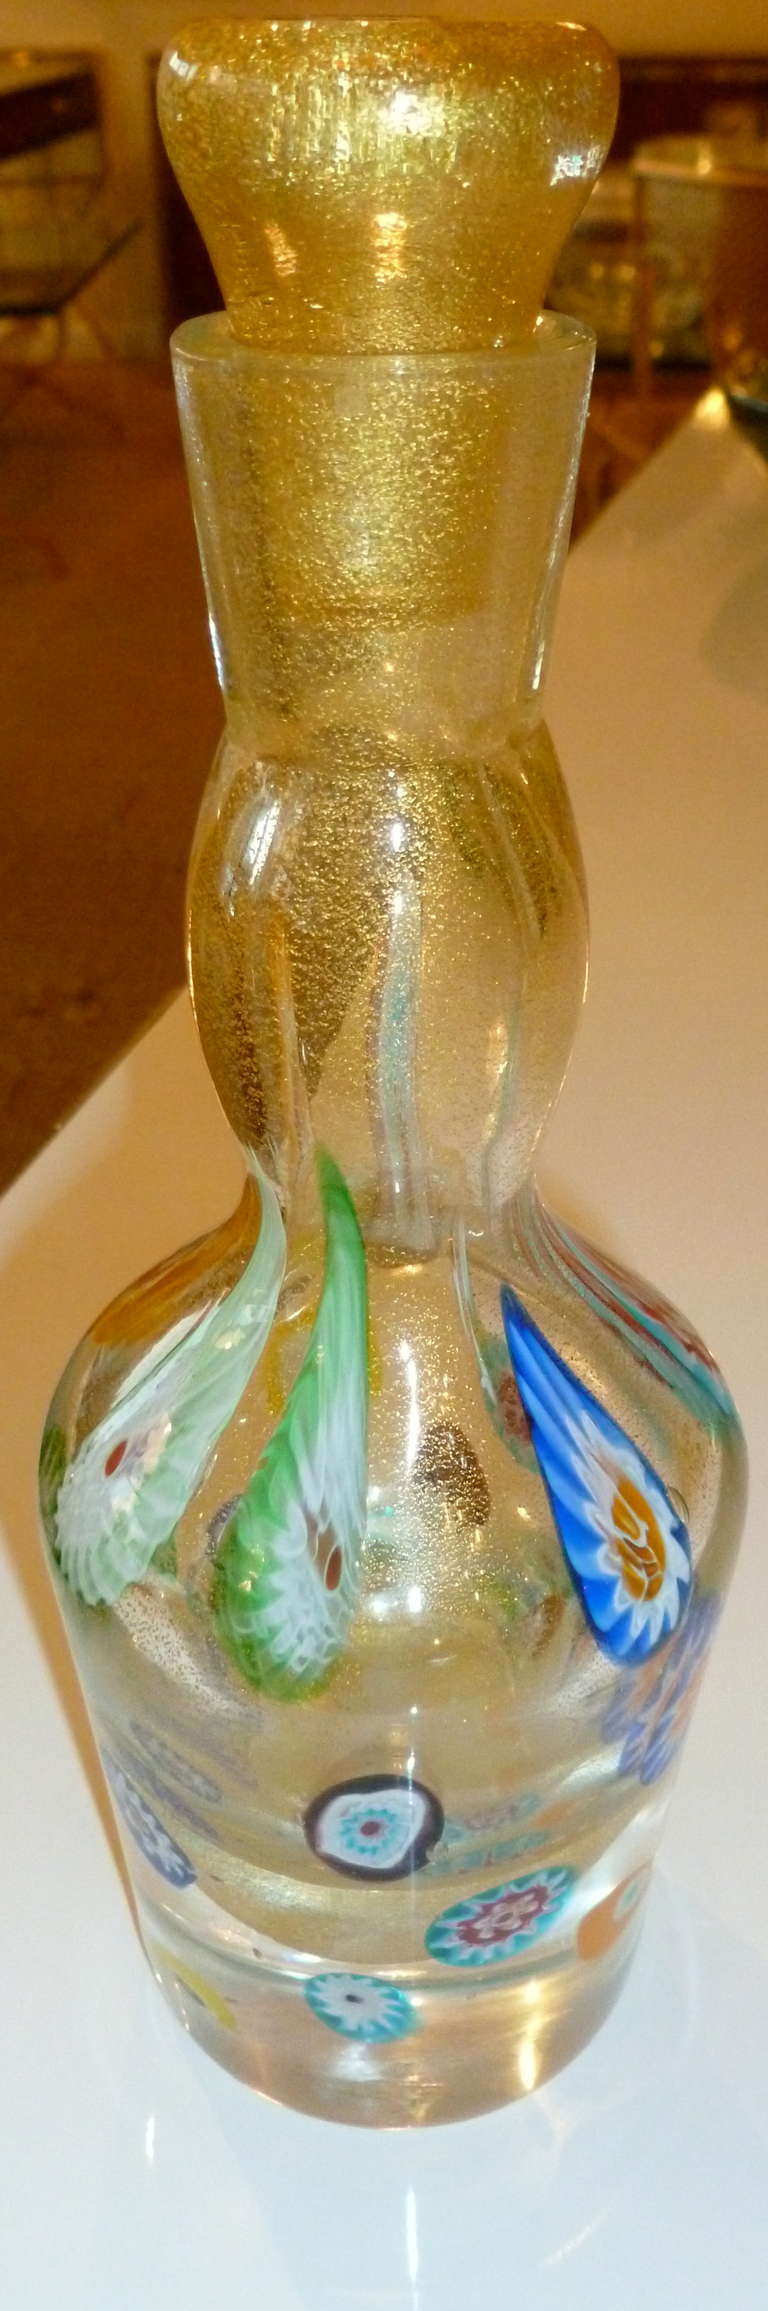 Fratelli Toso Murano Glass Decanter Perfume Bottle Gold Aventurine and
Murrhines For Sale 1